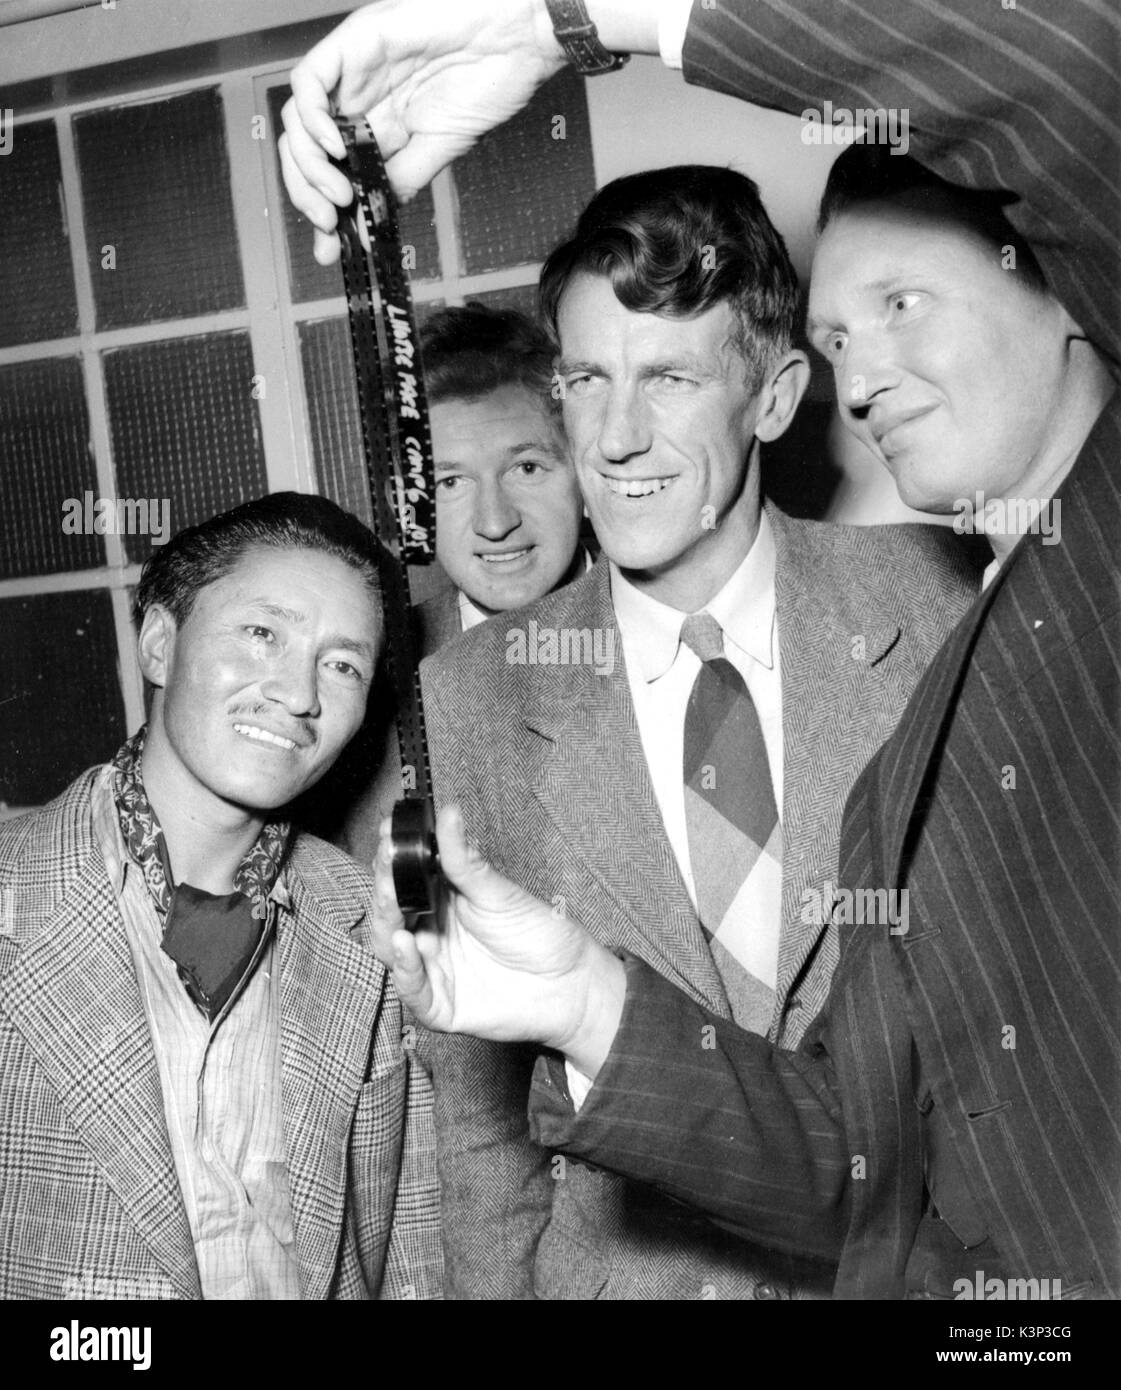 THE CONQUEST OF EVEREST [BR 1953] [L-R] SHERPA TENSING, Director and Cinematographer GEORGE LOWE, SIR EDMUND HILARY, Cinematographer TOM STOBART at Group 3 Studios, Beaconsfield to see the first rushes of the film made to record their successful expedition to Mount Everest.     Date: 1953 Stock Photo